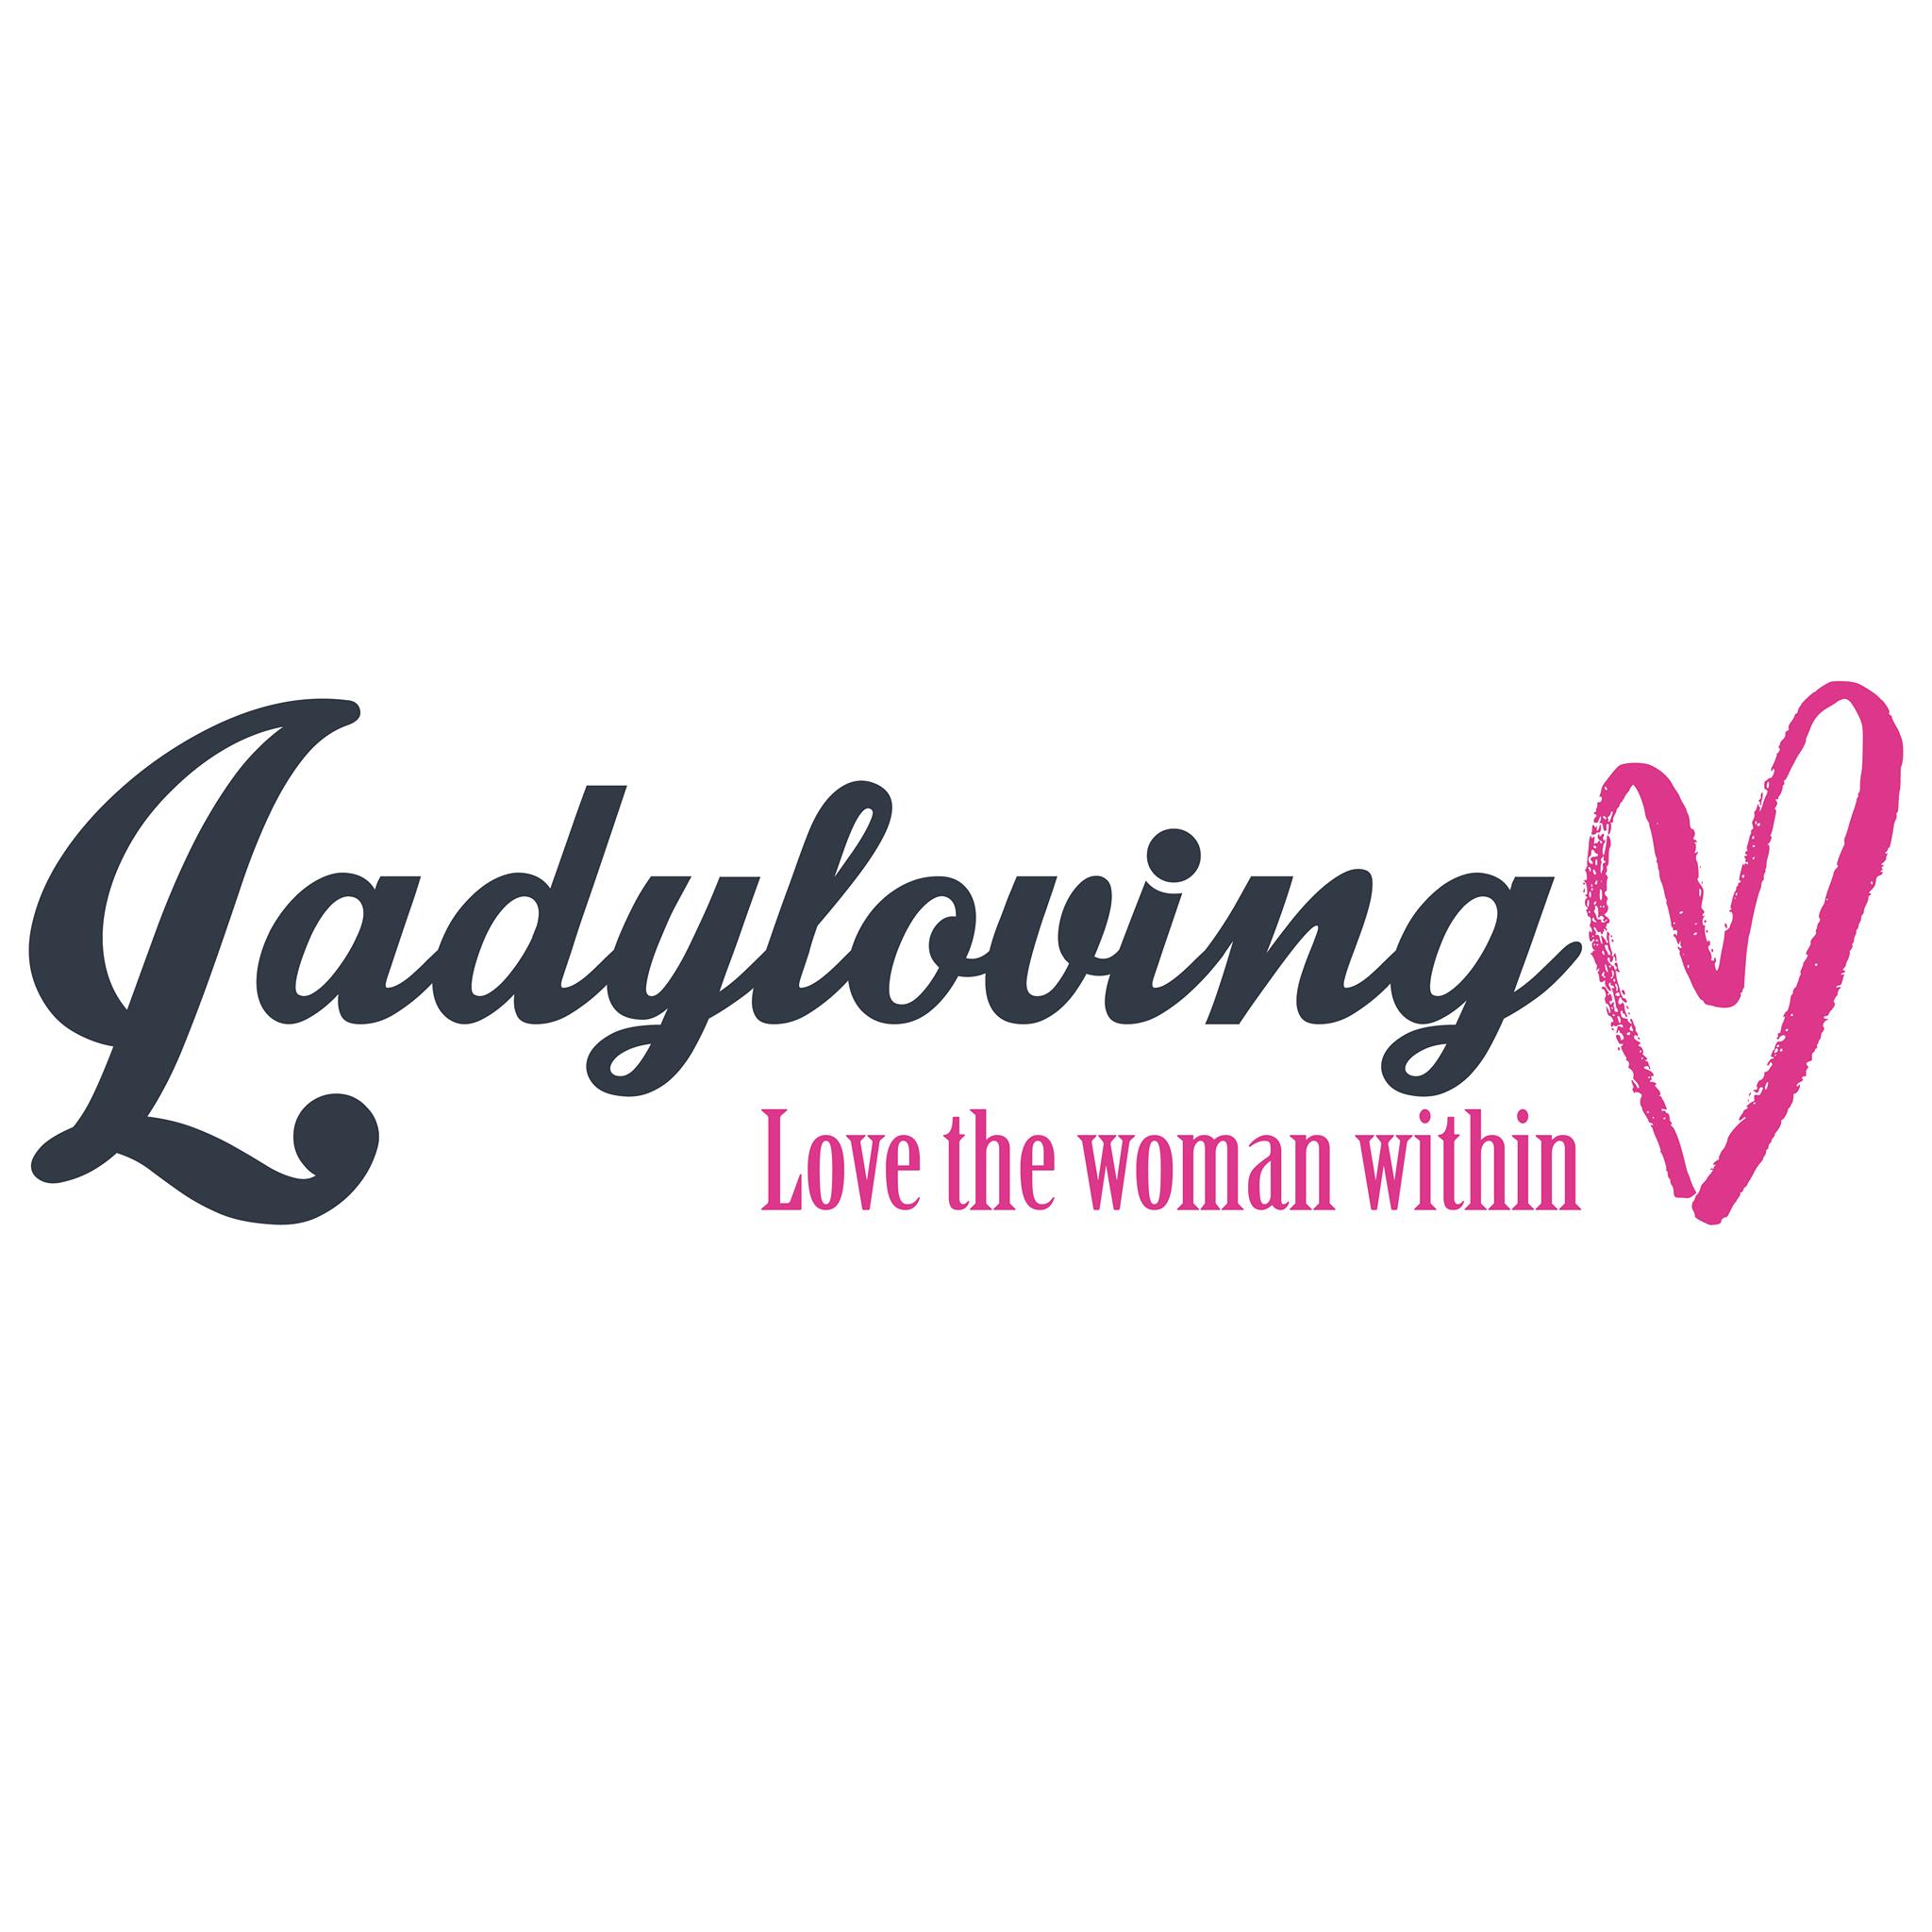 Ladyloving Adult Toy Store